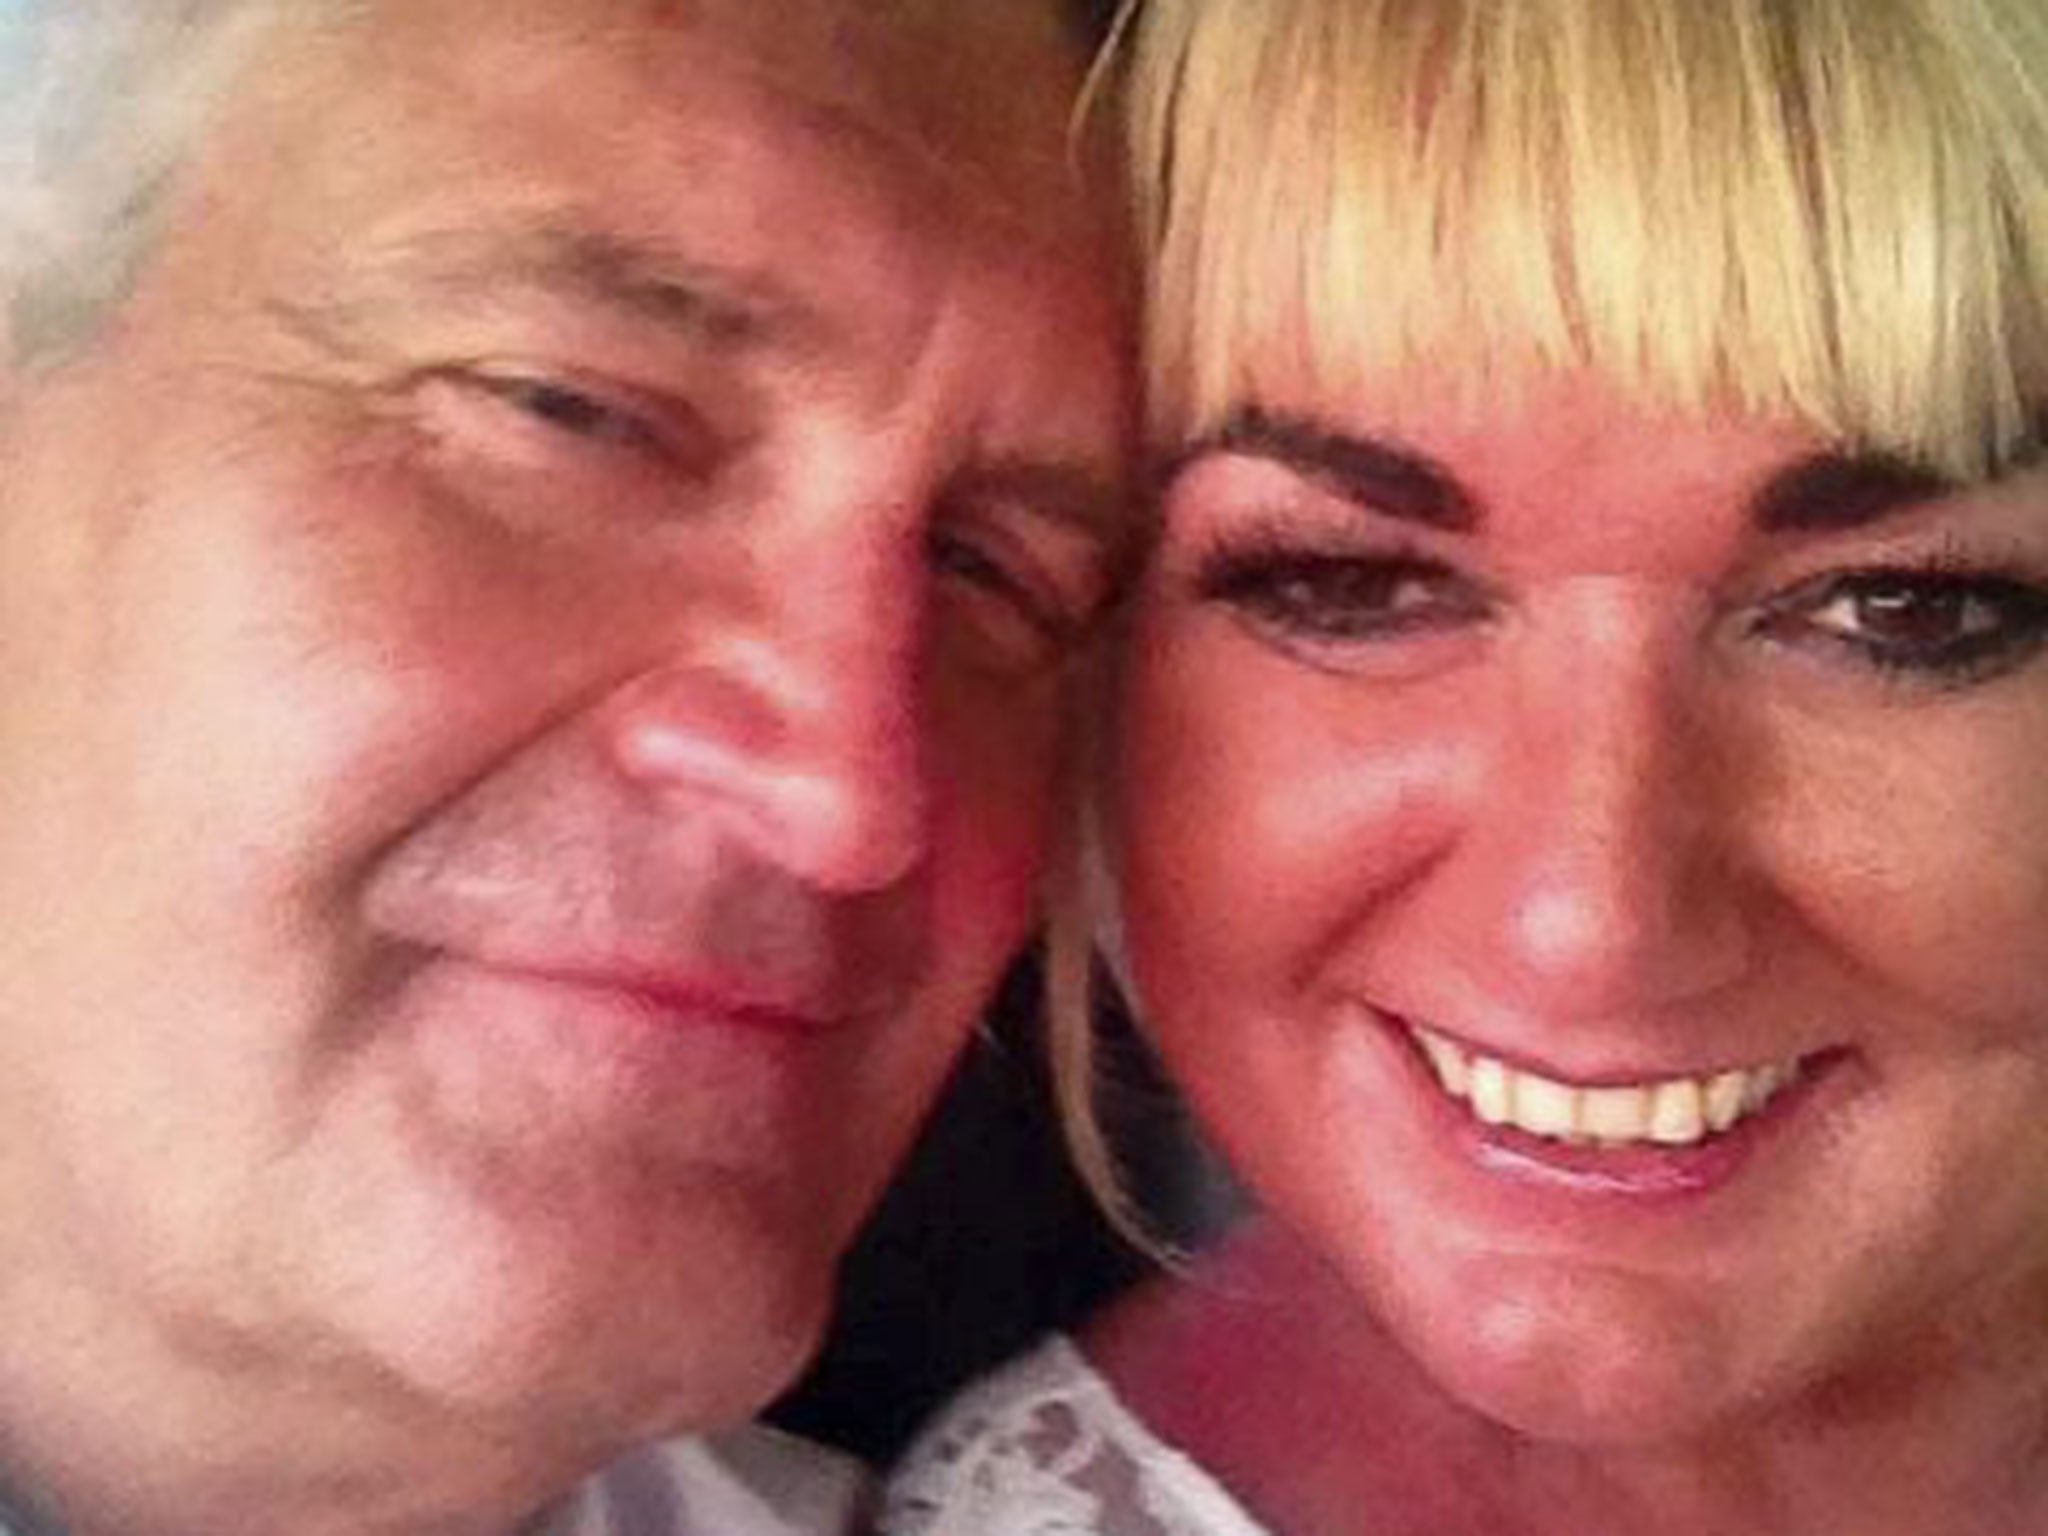 David Edwards was stabbed to death by his wife, Sharon, two months after their marriage